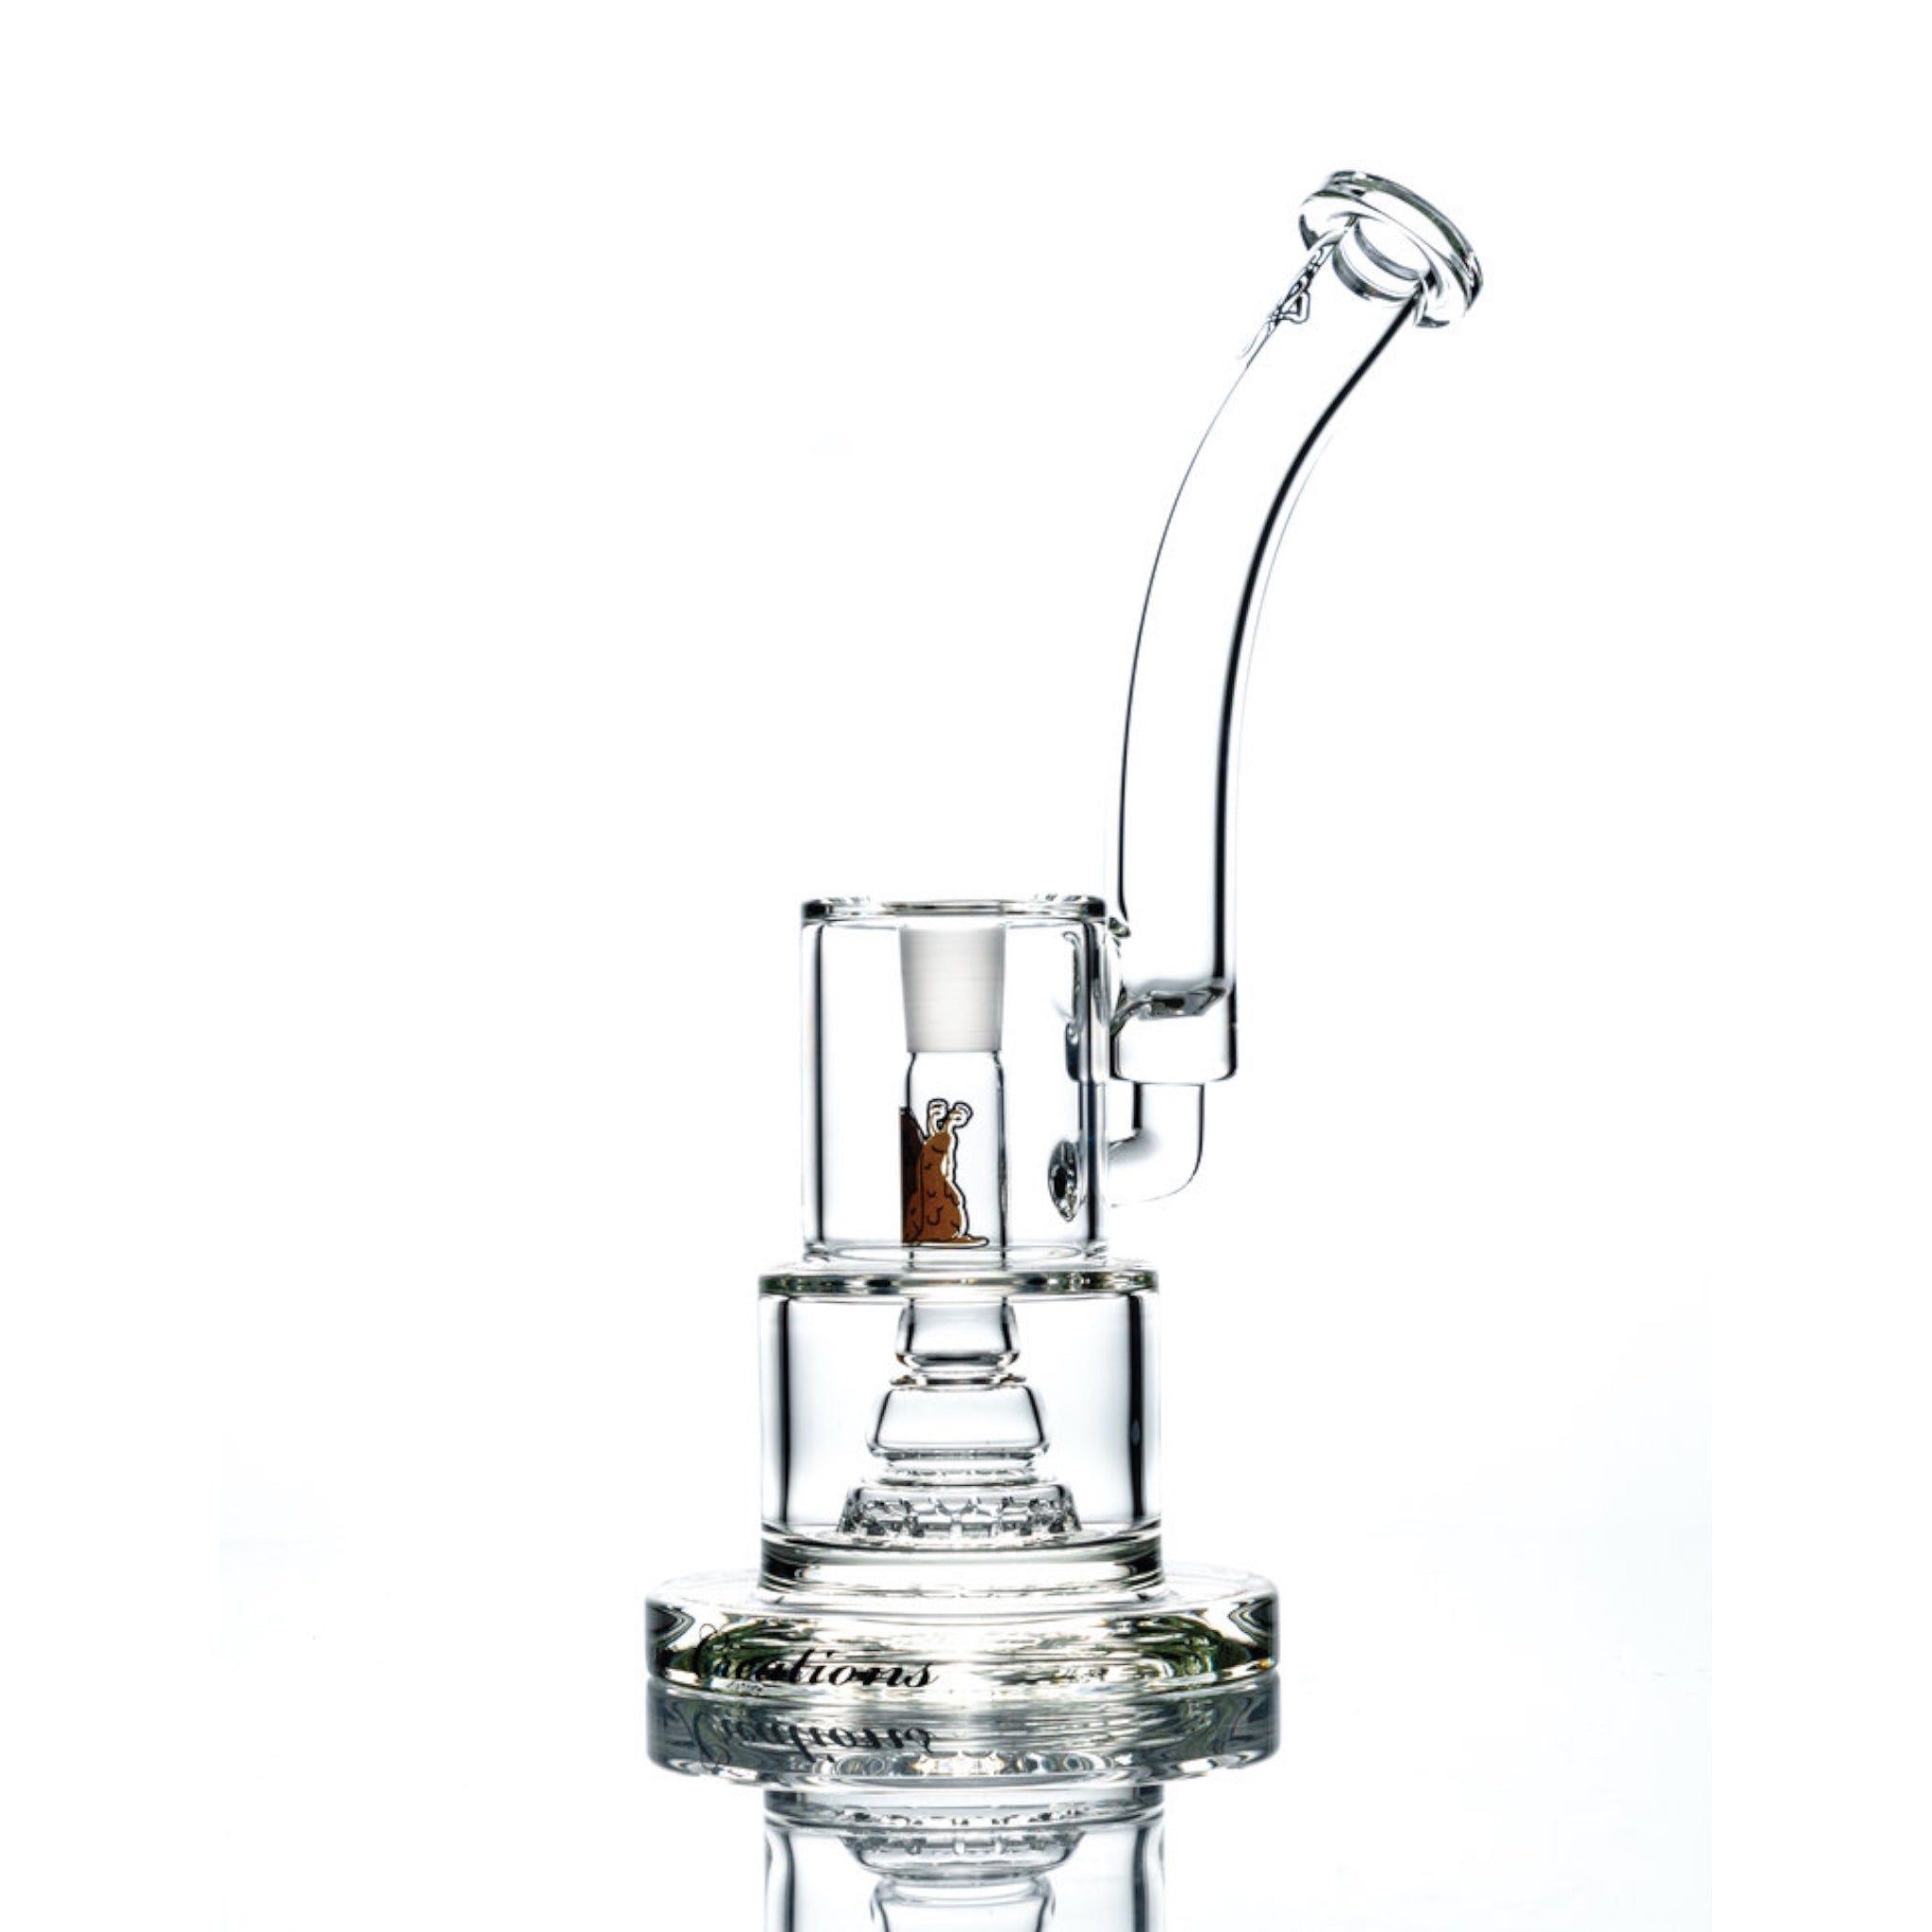 Custom Creations - Small Bubber Bong With Sprocket Perc - Cake SP